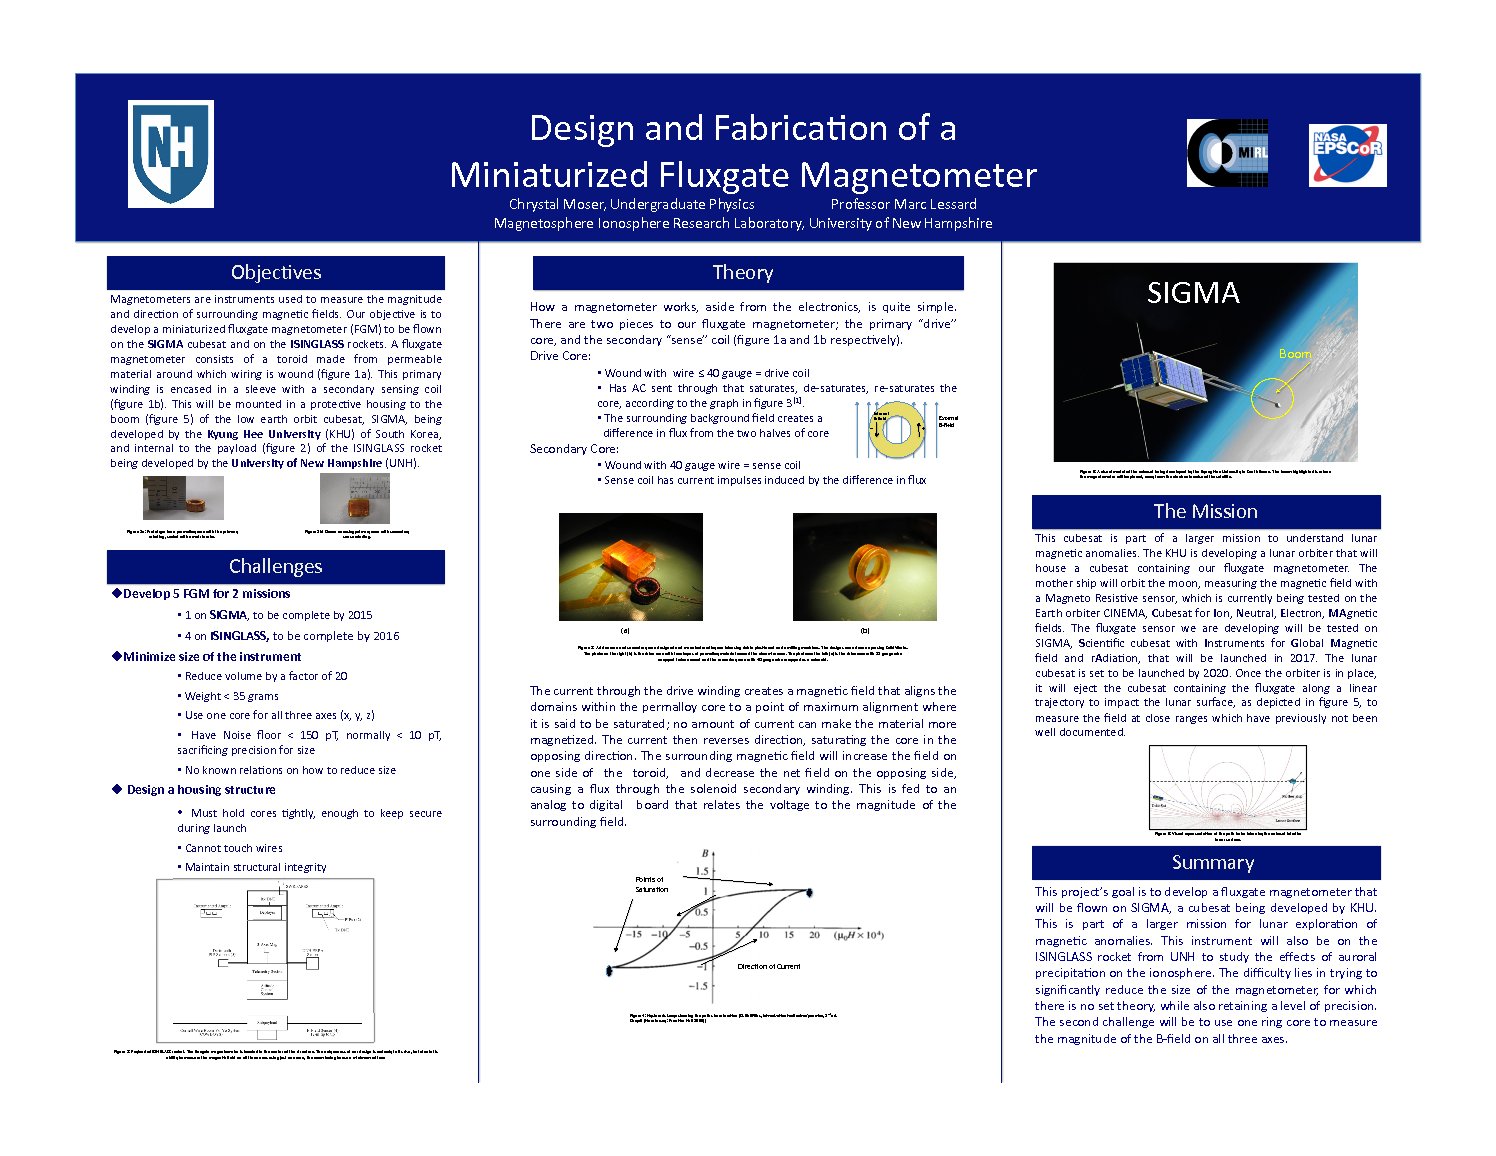 Design And Fabrication Of A Miniaturized Fluxgate Magnetometer by csp42